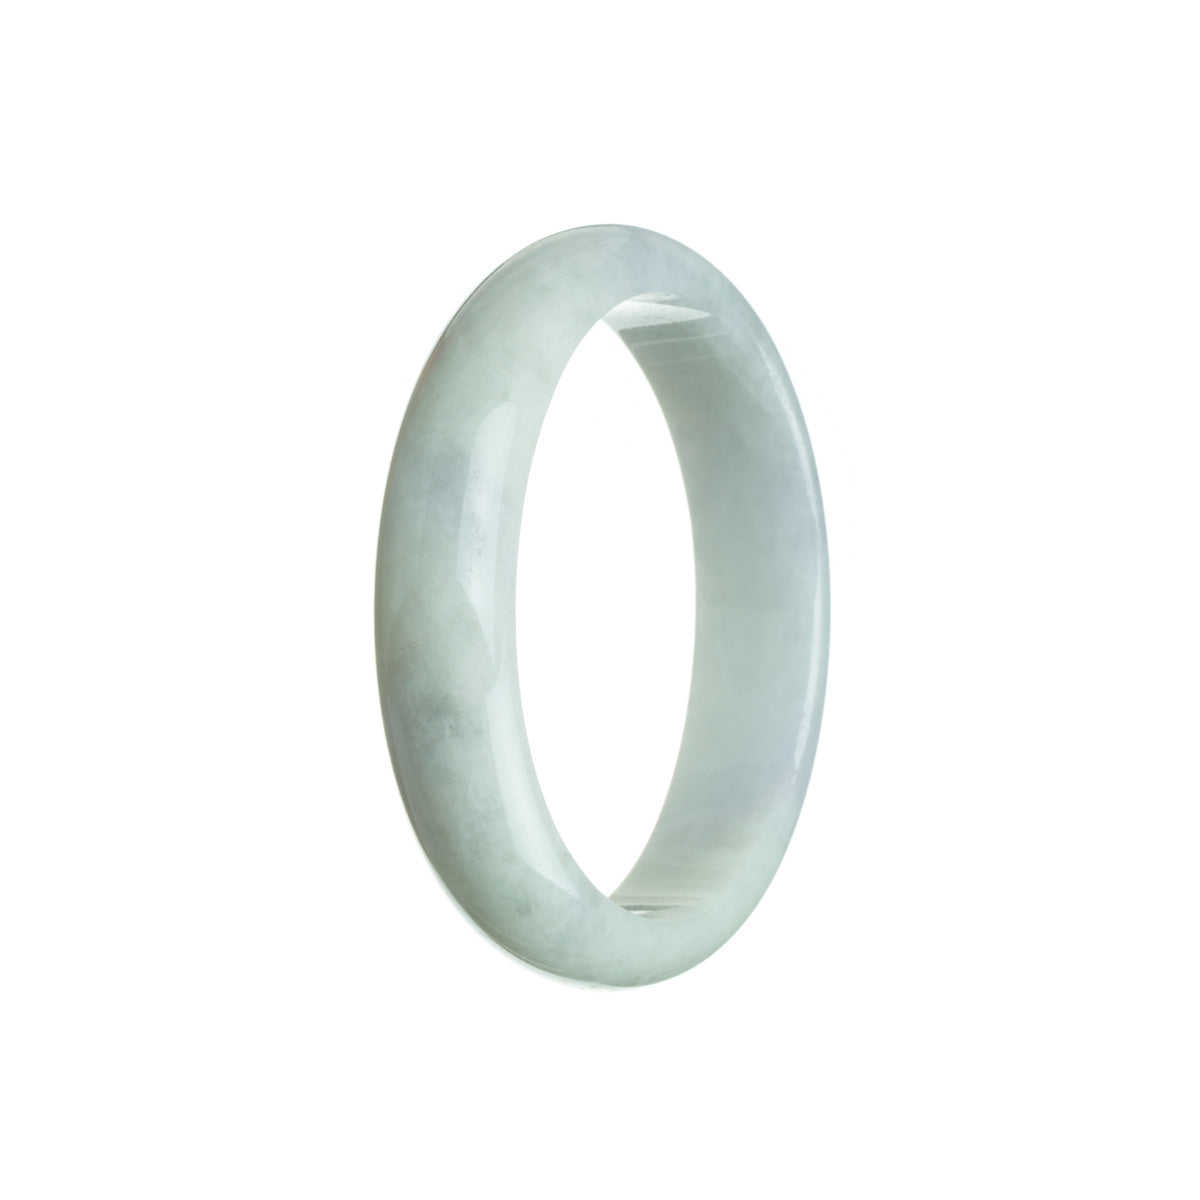 A beautiful, oval-shaped jade bangle bracelet with a pale green color and subtle lavender undertones. The bracelet is made from high-quality grade A jade and measures 56mm in diameter. Designed and crafted by MAYS GEMS.